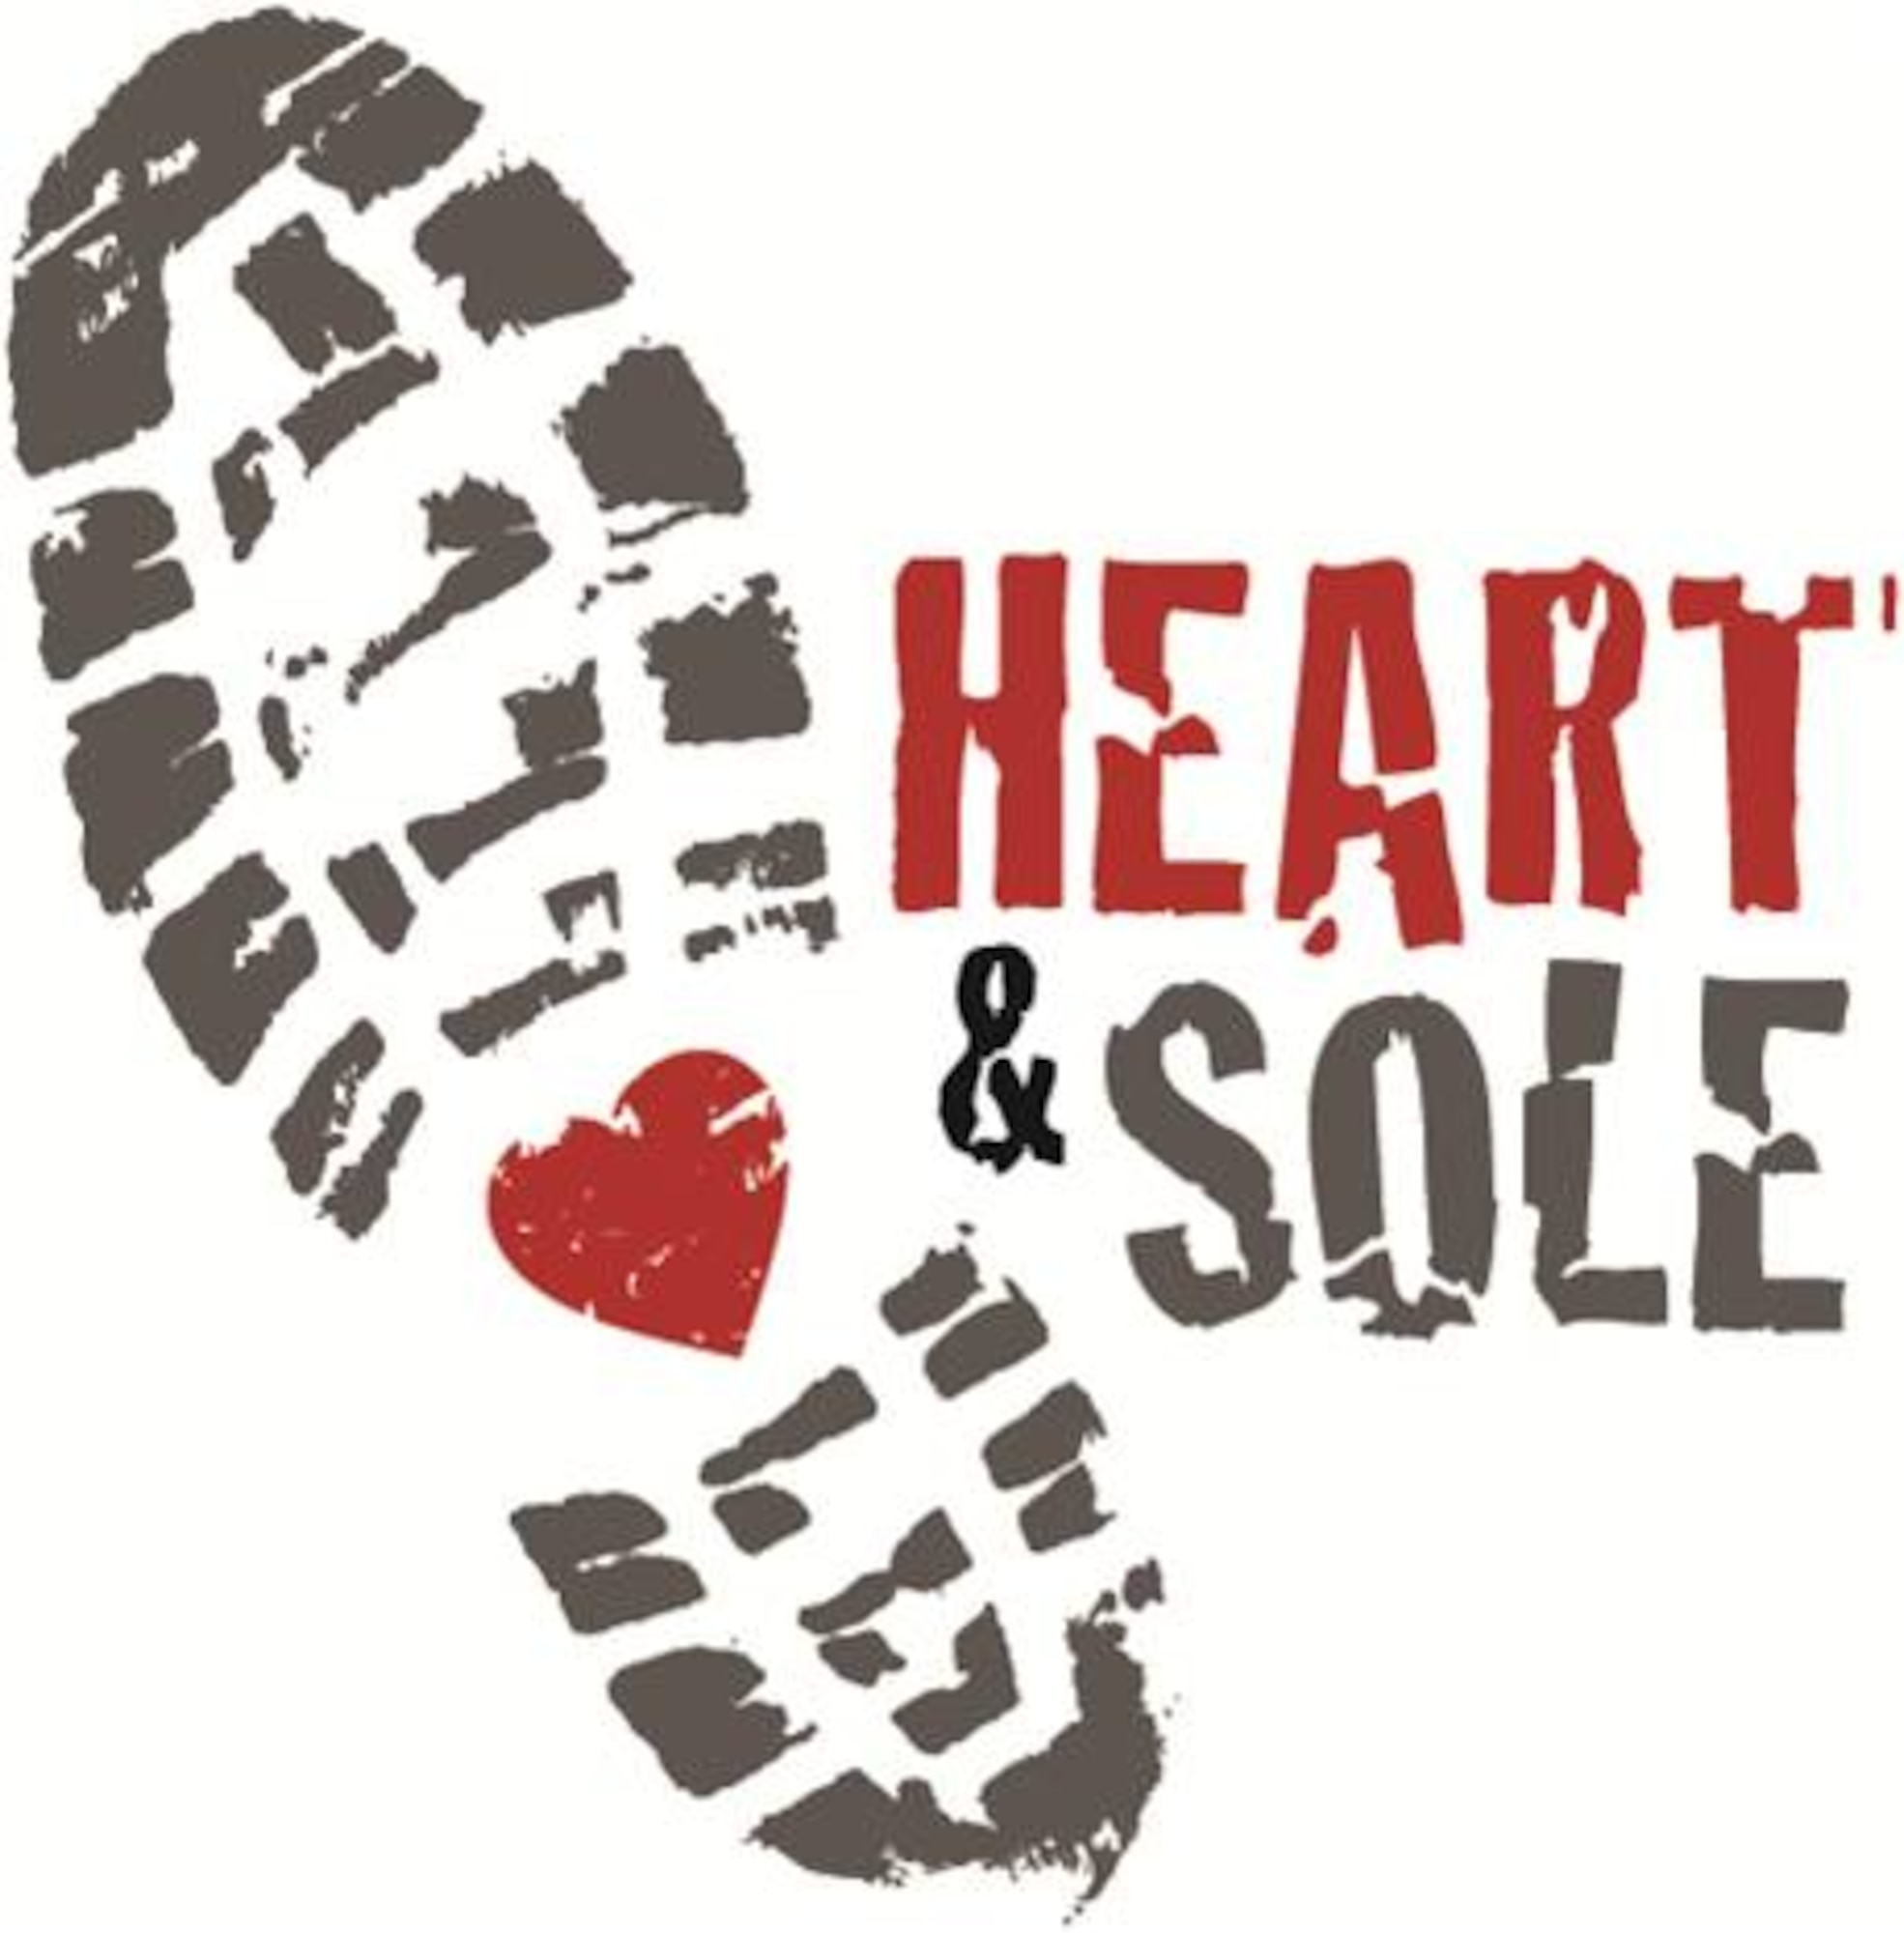 As part of American Heart Month, Air Force Materiel Command's Wellness Support Center will be promoting its Heart & Sole walking initiative during February. (U.S. Air Force graphic)